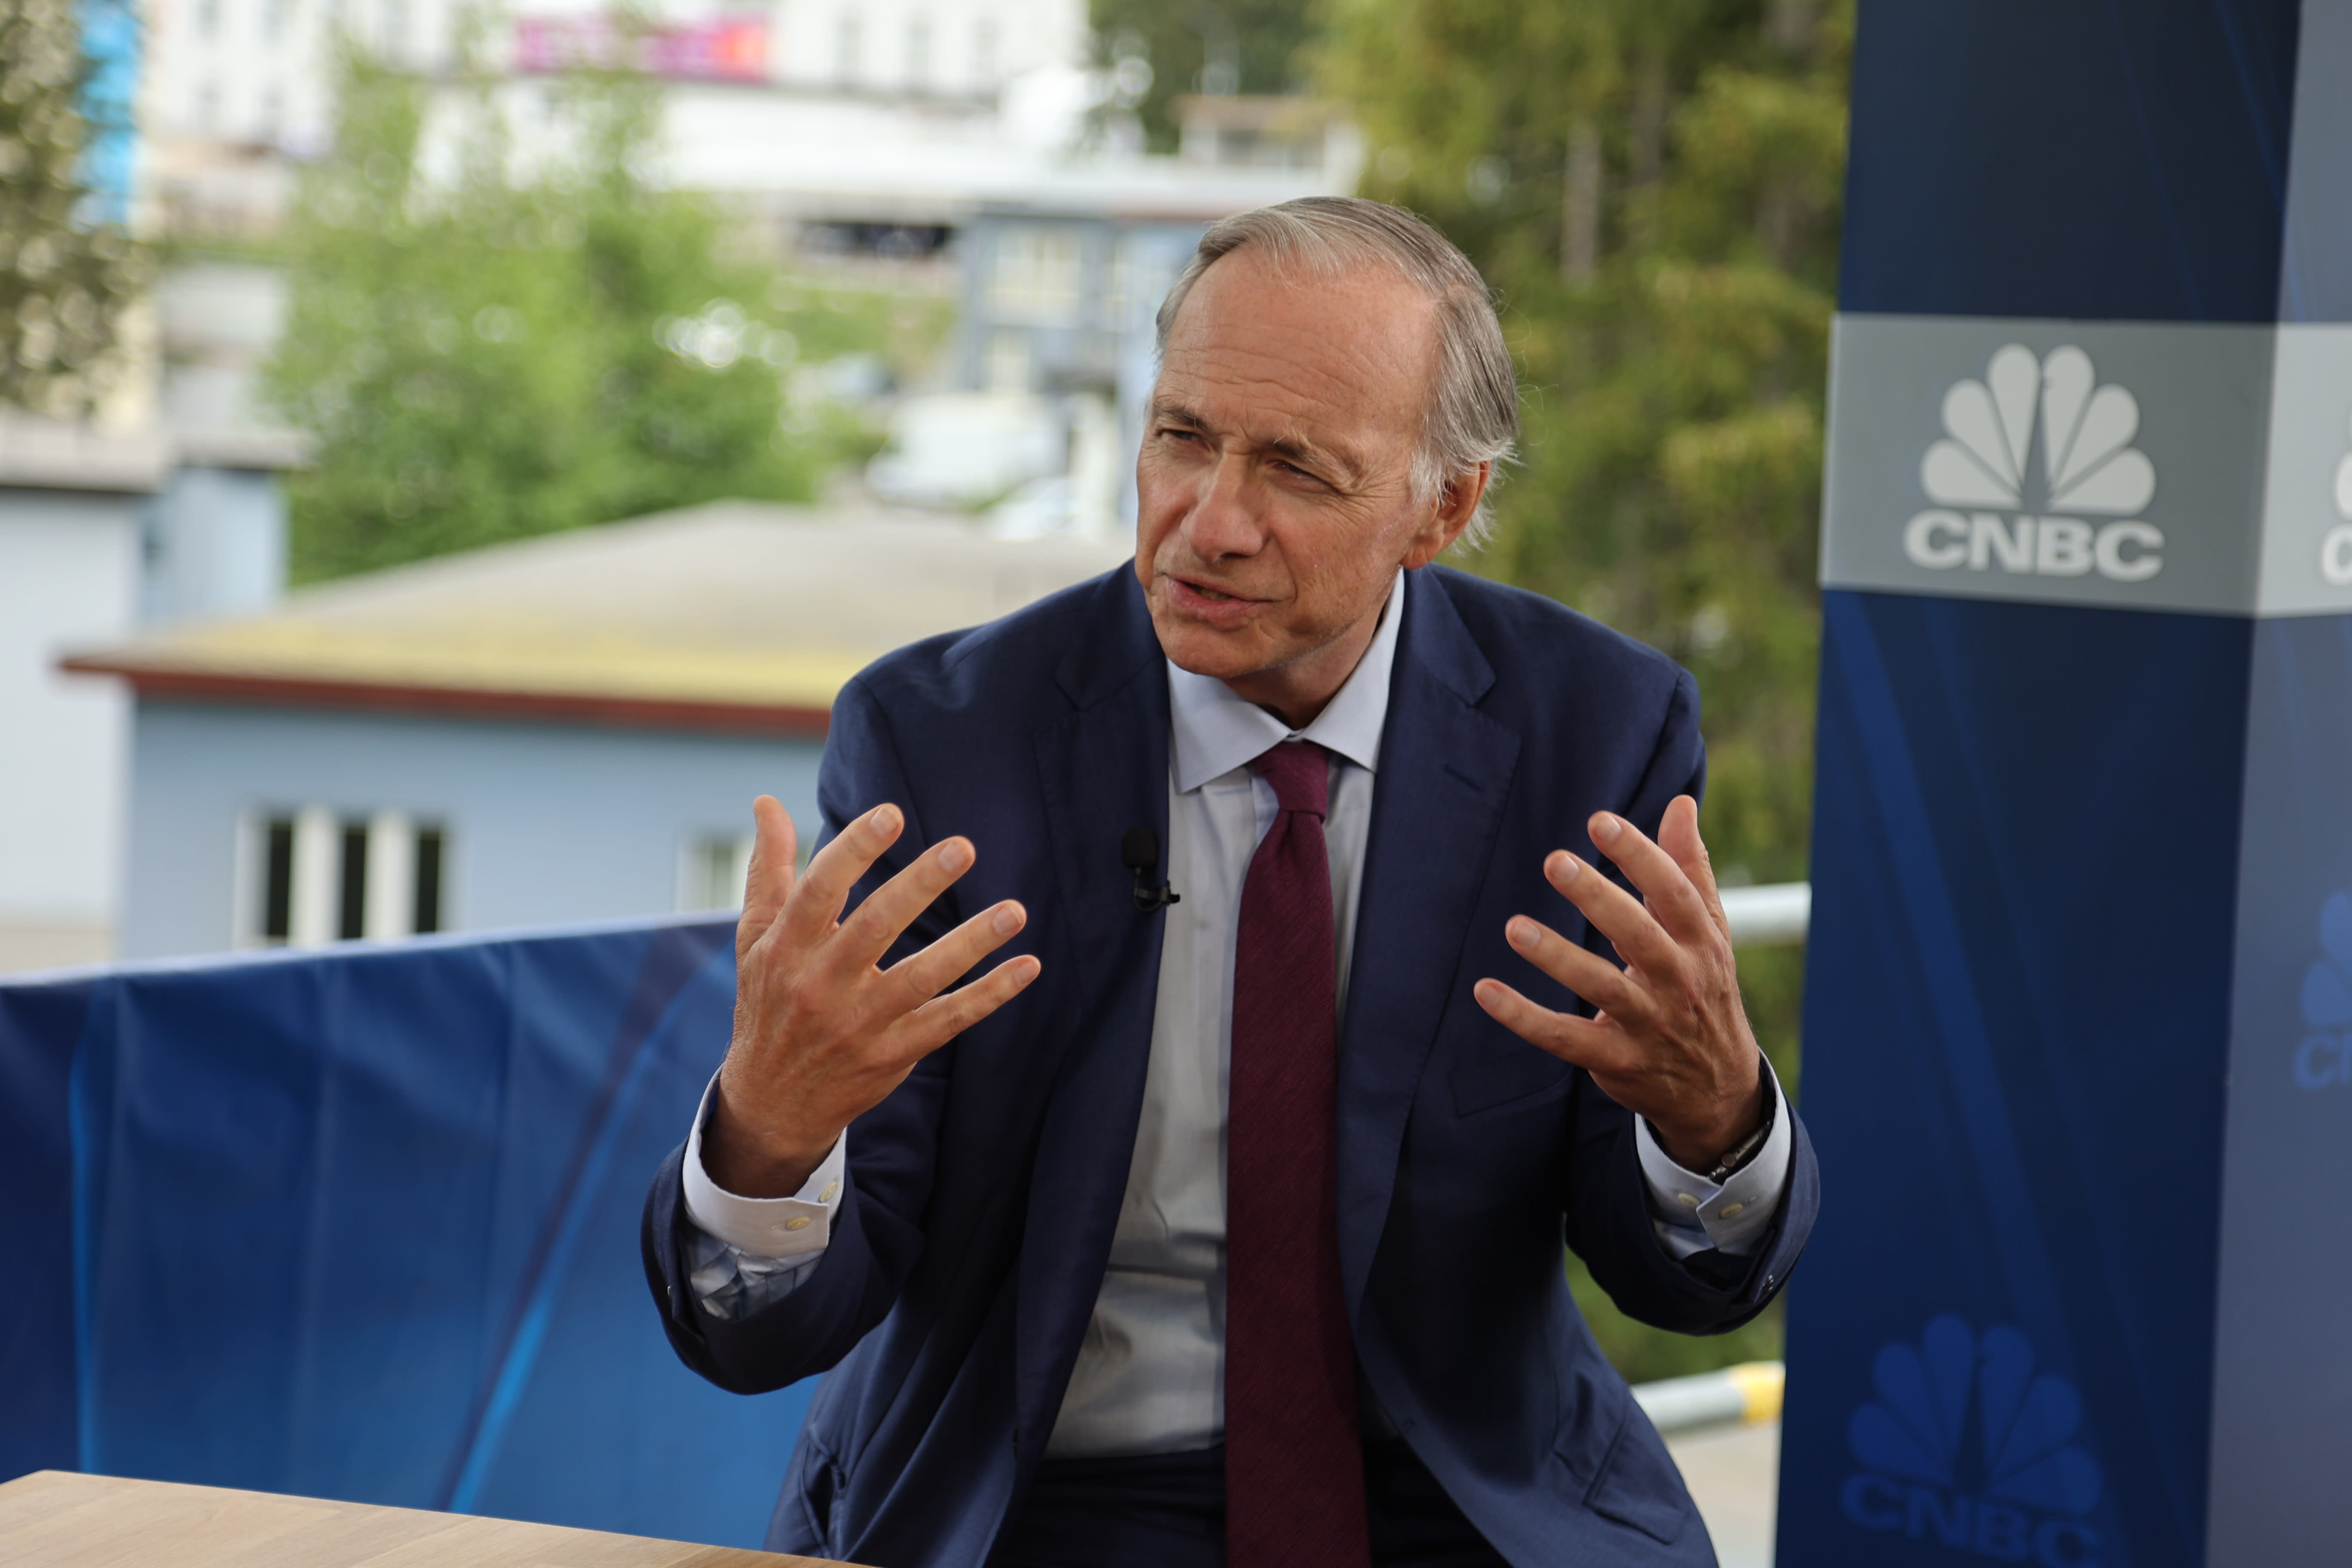 Ray Dalio says higher interest rates to squash inflation could tank stock prices by 20%